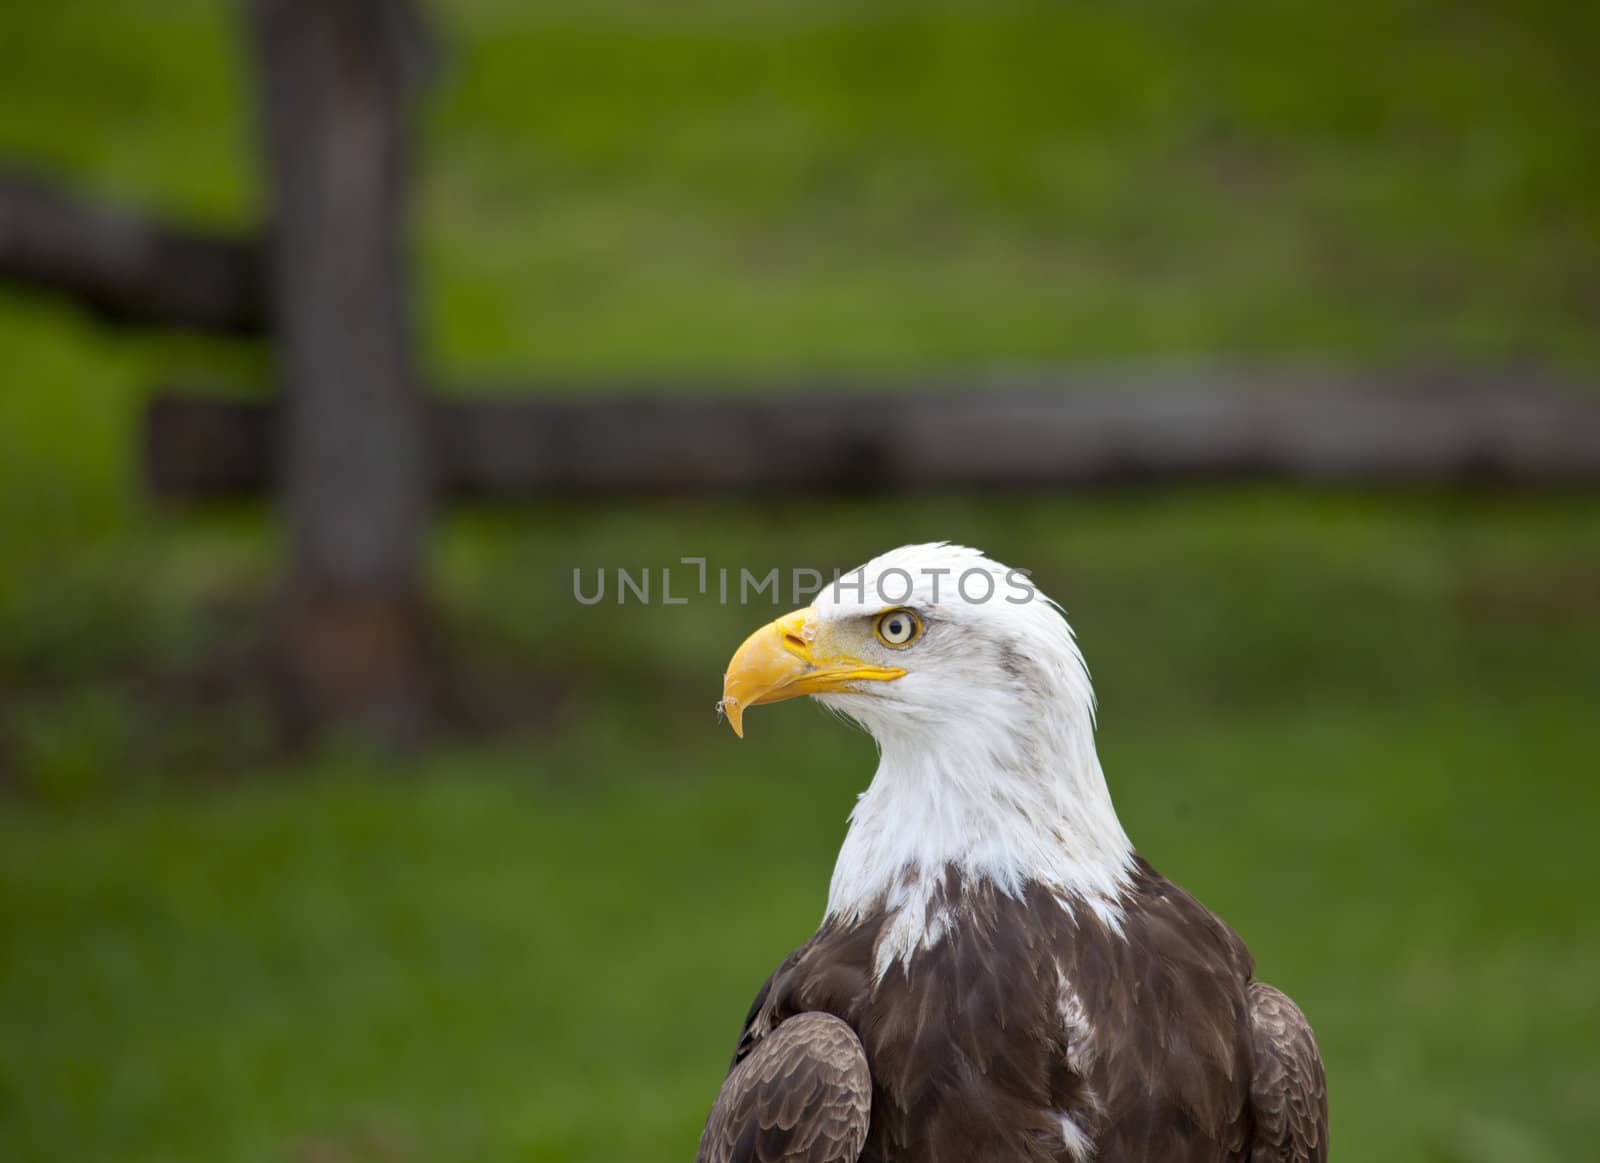 Head of sea eagle standing with green background